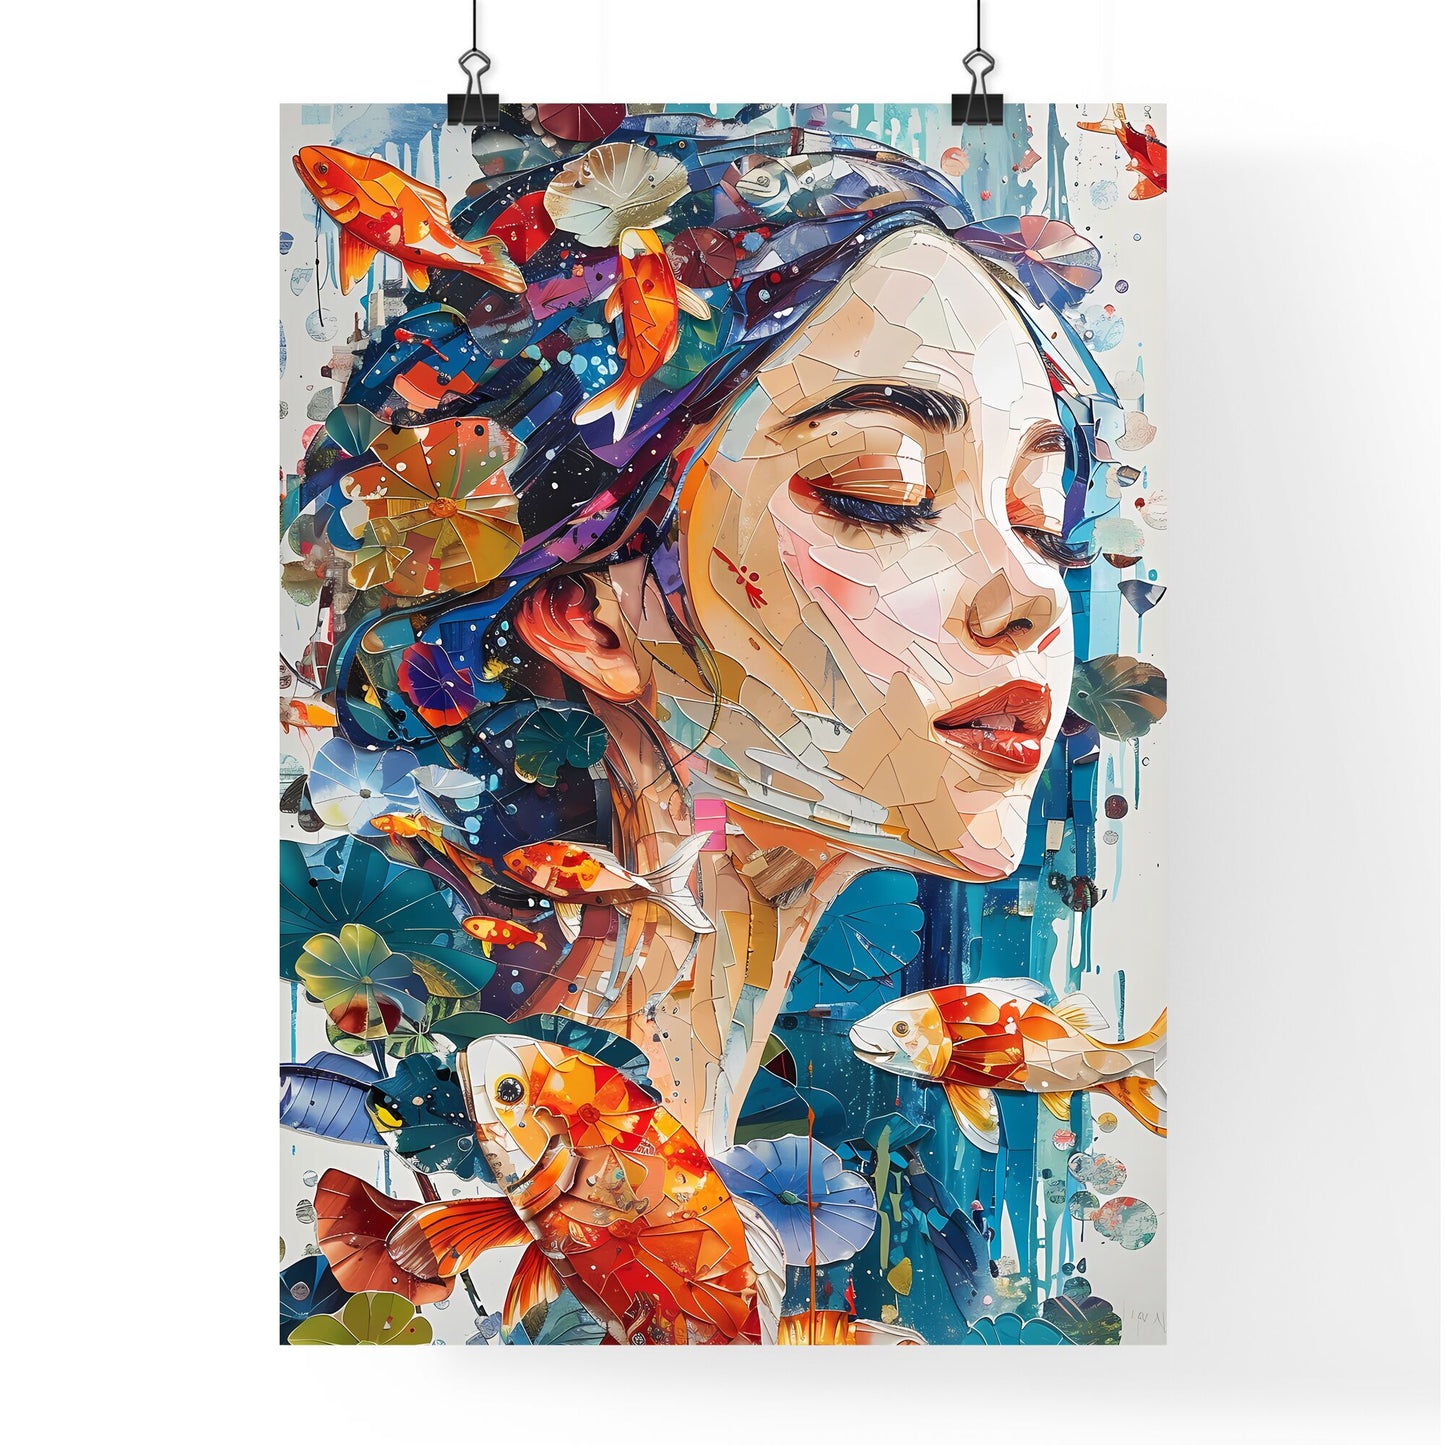 Colorful Pop Art Venus Mosaic: Vibrant Screen Printed Painting with Spray Paint and Fish Default Title